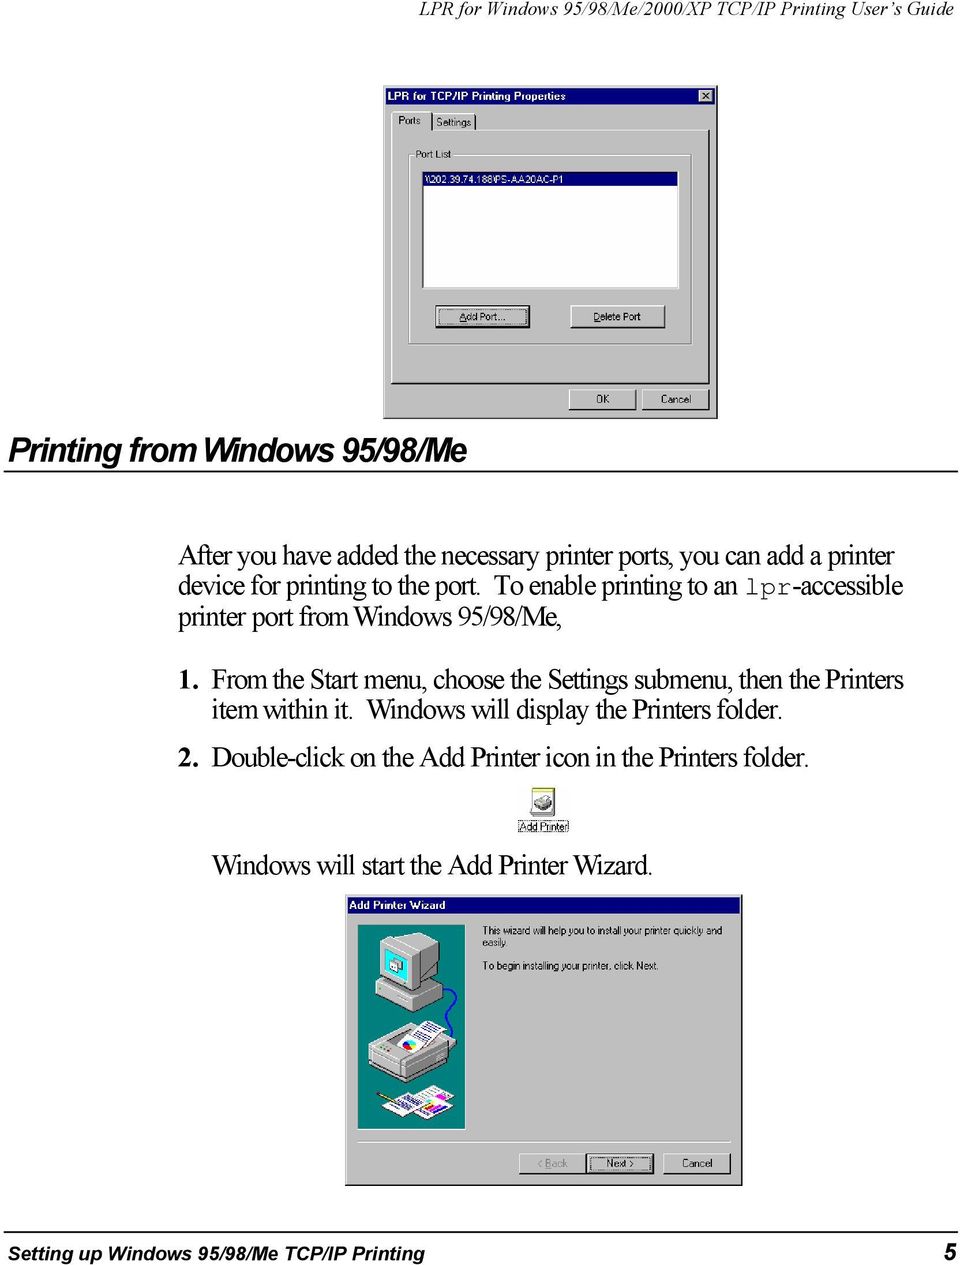 From the Start menu, choose the Settings submenu, then the Printers item within it.